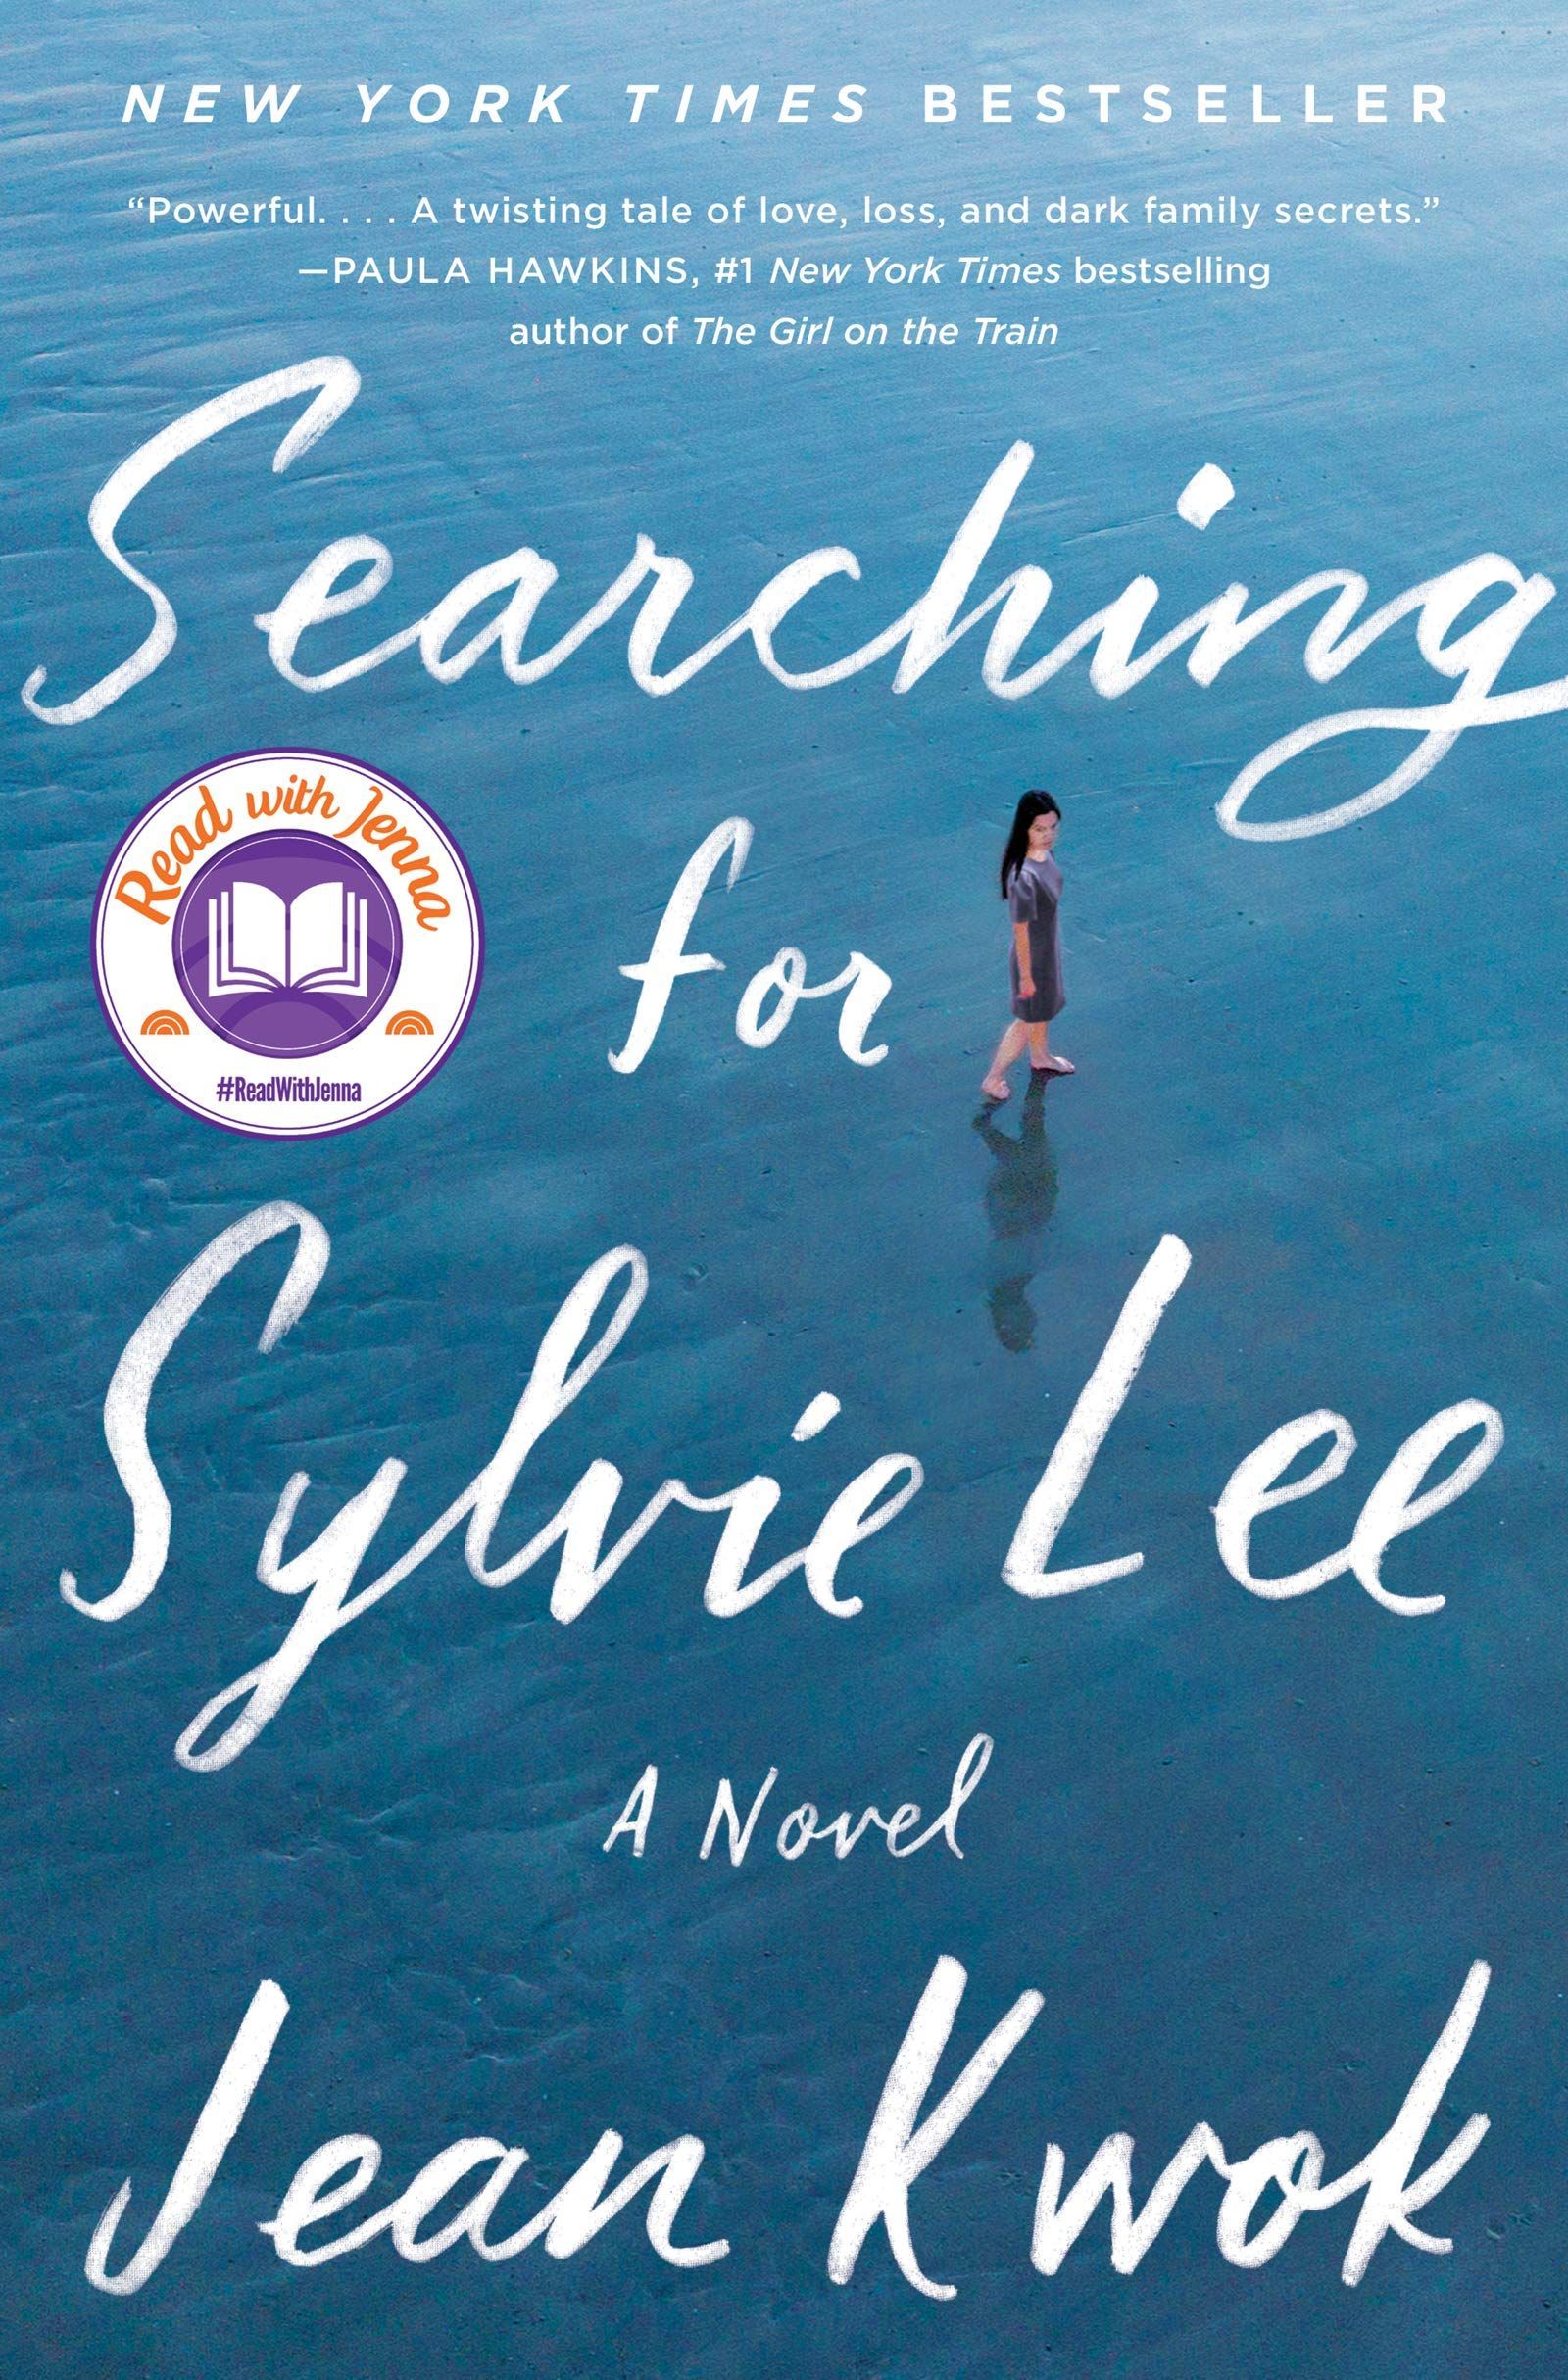 The Secret Lives of Sisters: On “Searching for Sylvie Lee”